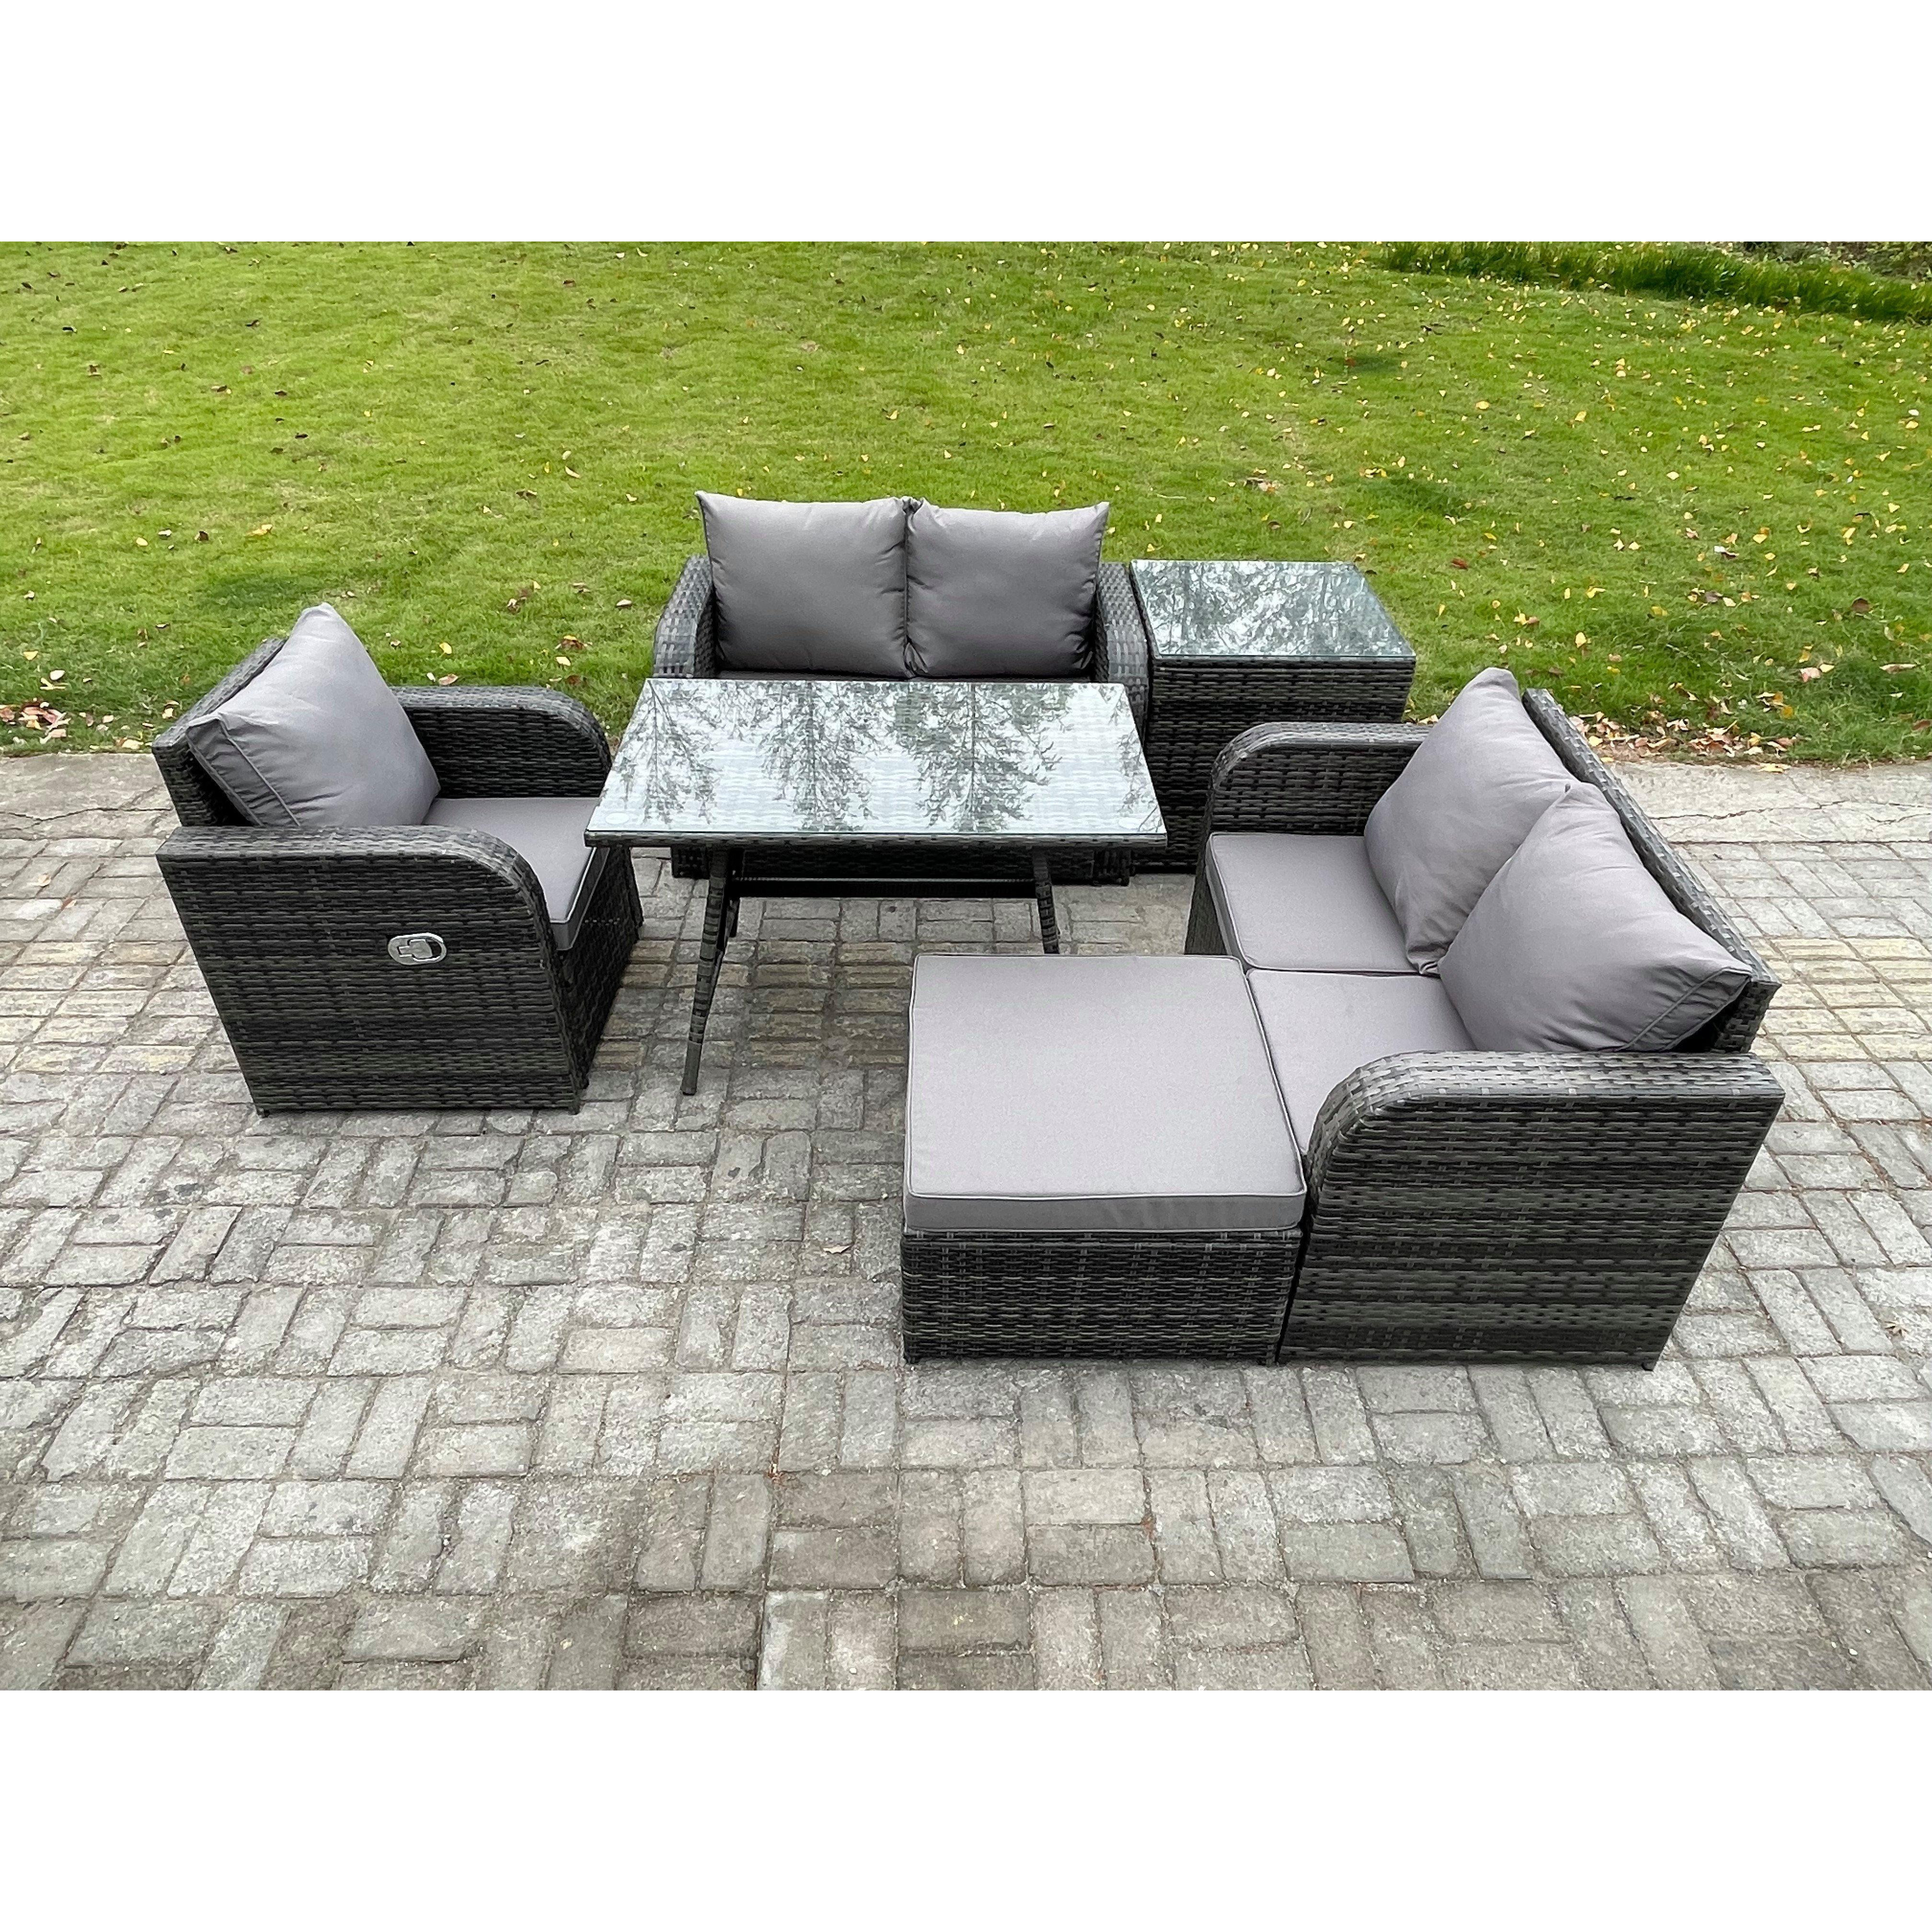 6 Pieces Outdoor Garden Dining Sets Rattan Furniture With Dining Table Armchairs Love Sofa Big Footstool Side Table Dark Grey Mixed - image 1